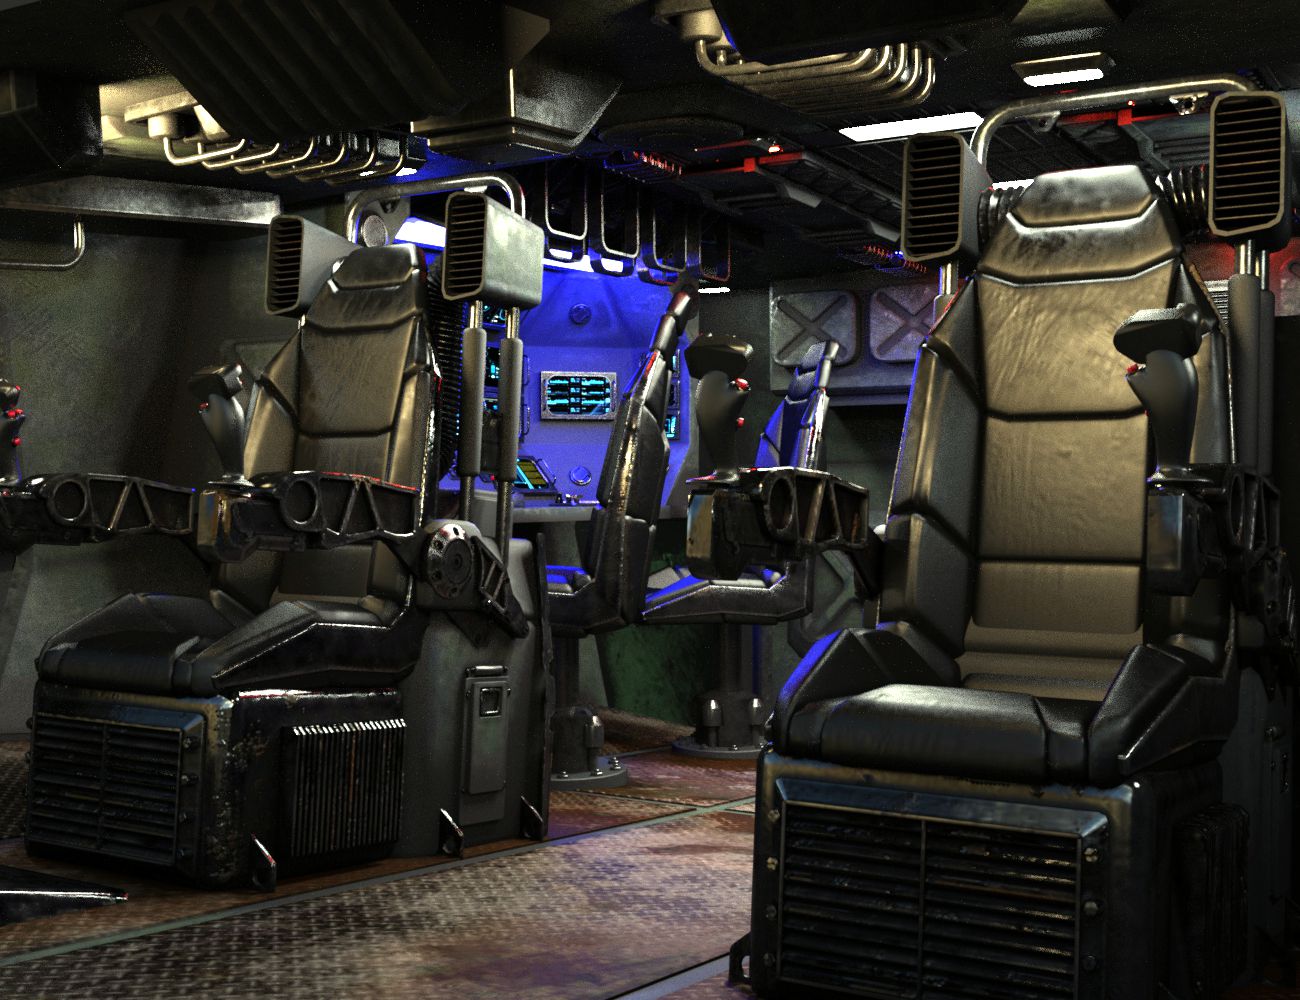 Heavy Mobile Command Post by: DzFire, 3D Models by Daz 3D